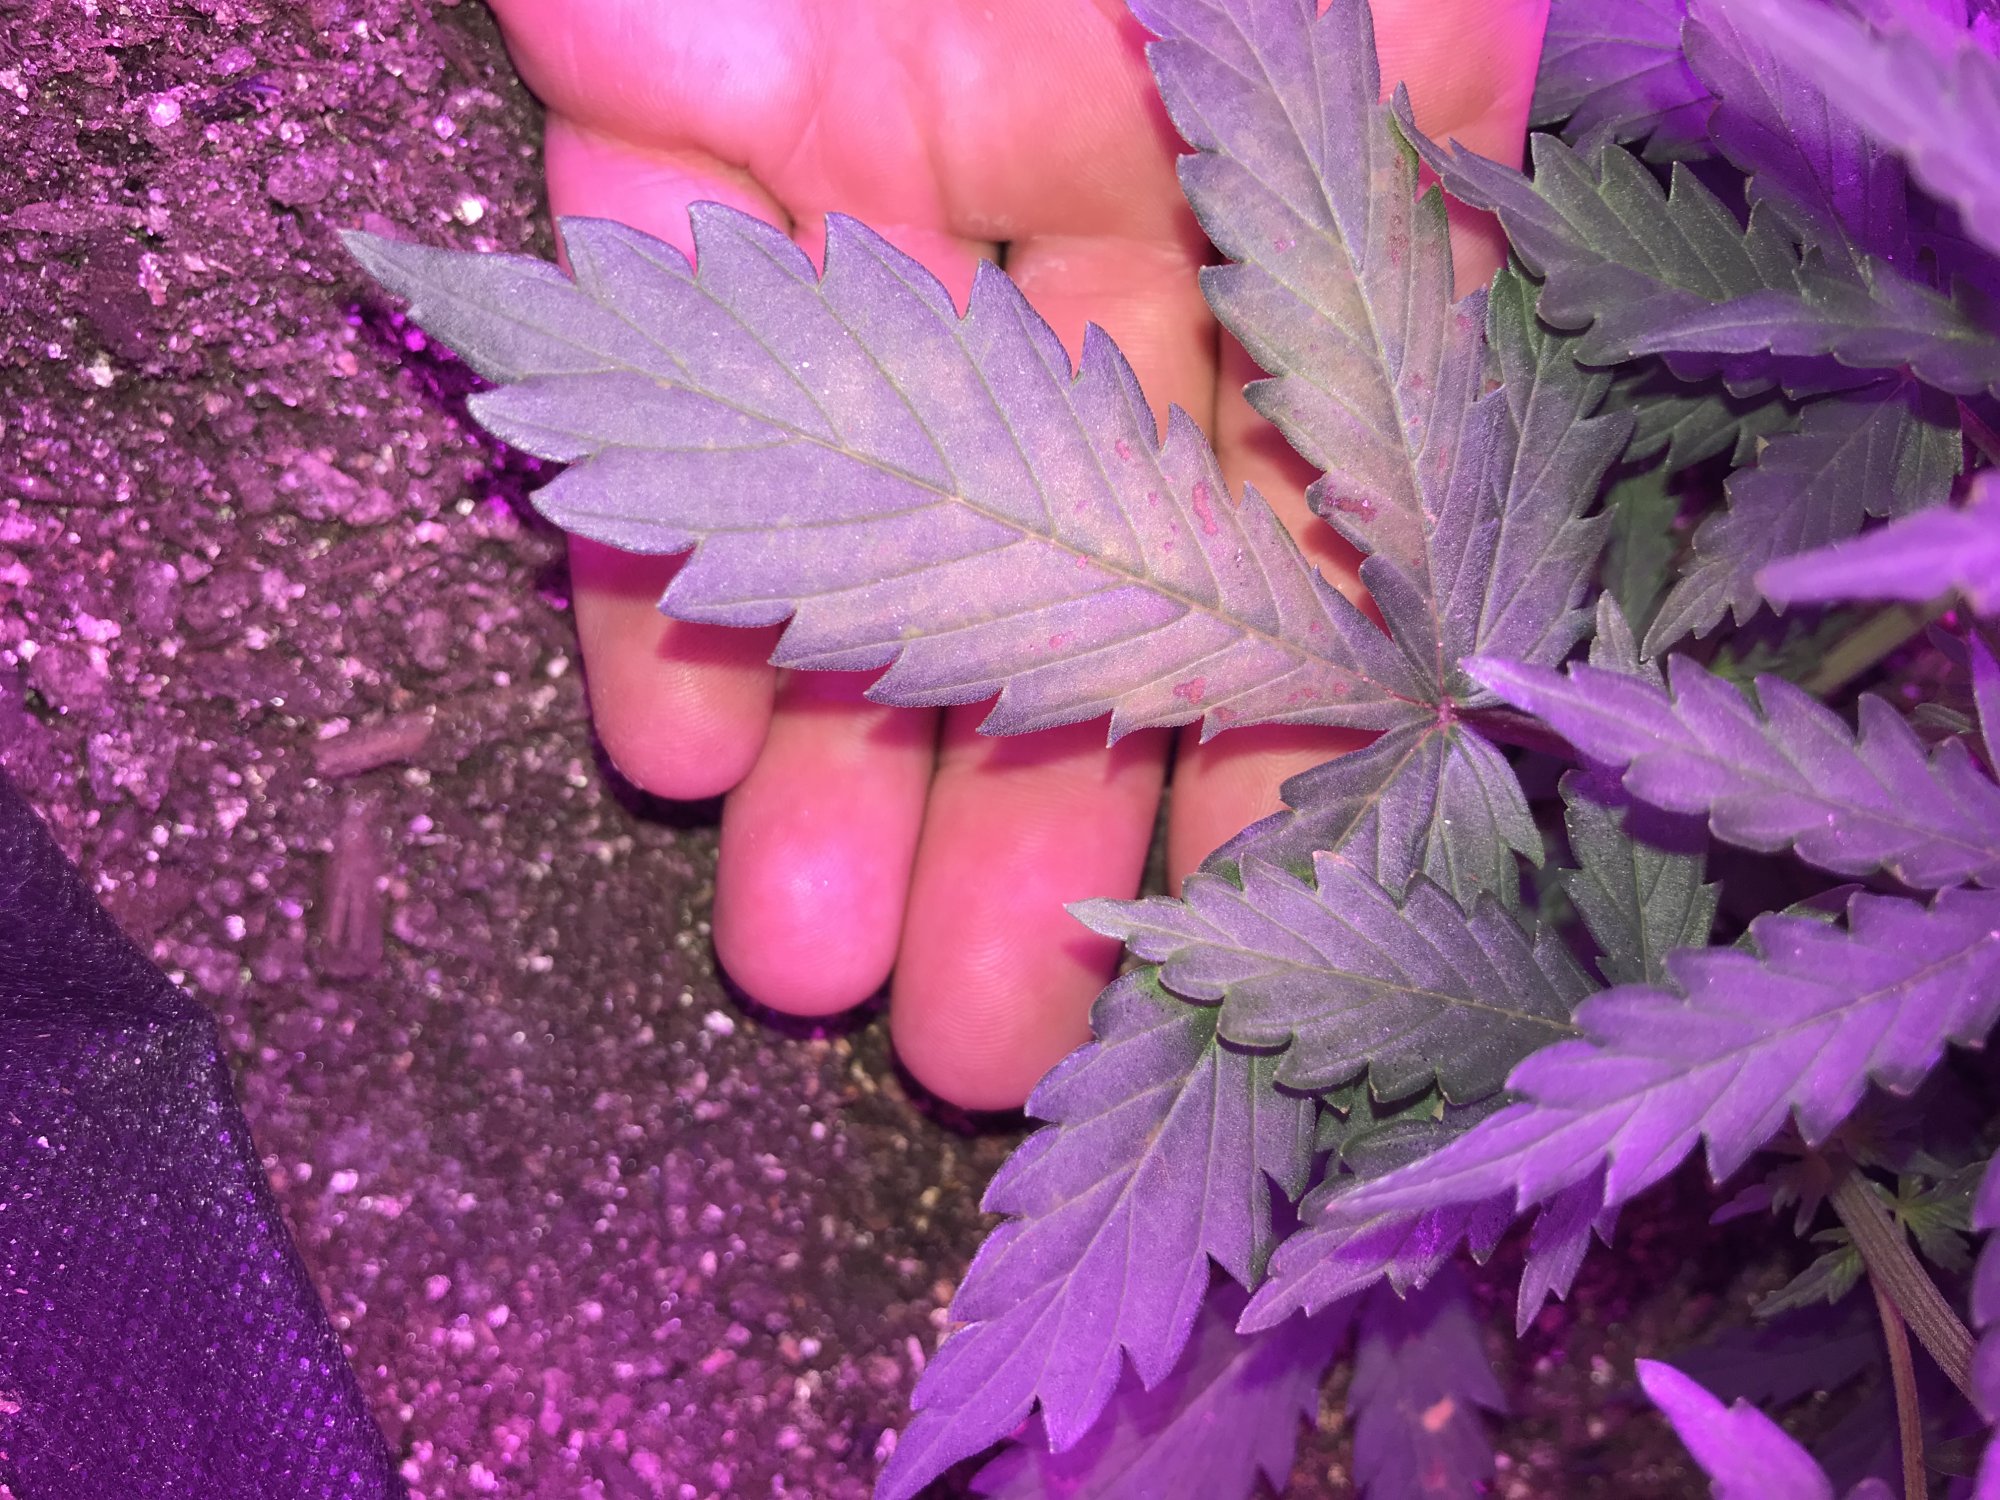 Help dont know whats happening with lower leafs